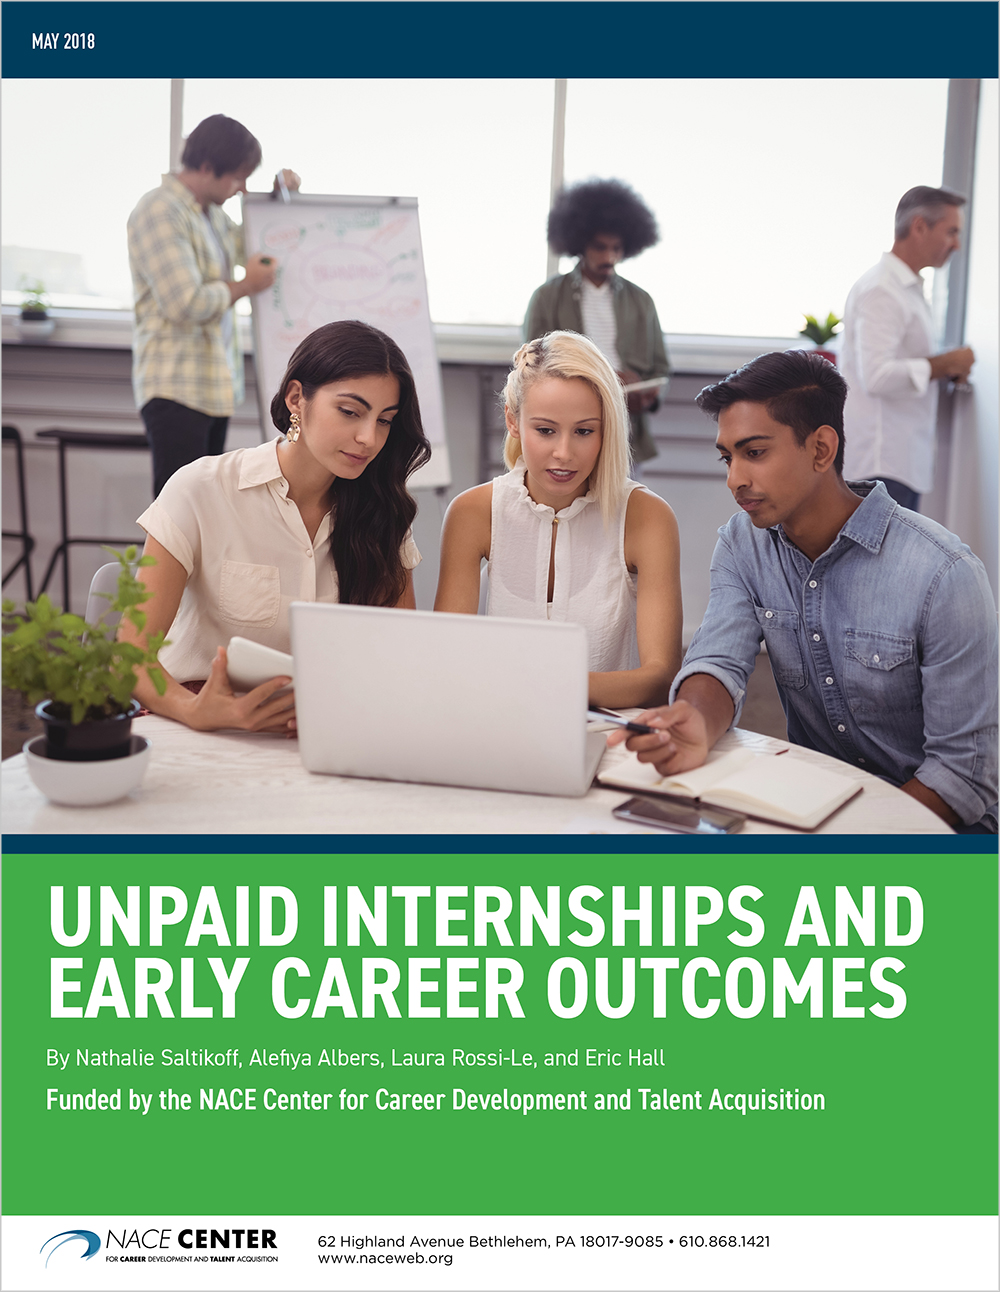 Unpaid Internships and Early Career Outcomes